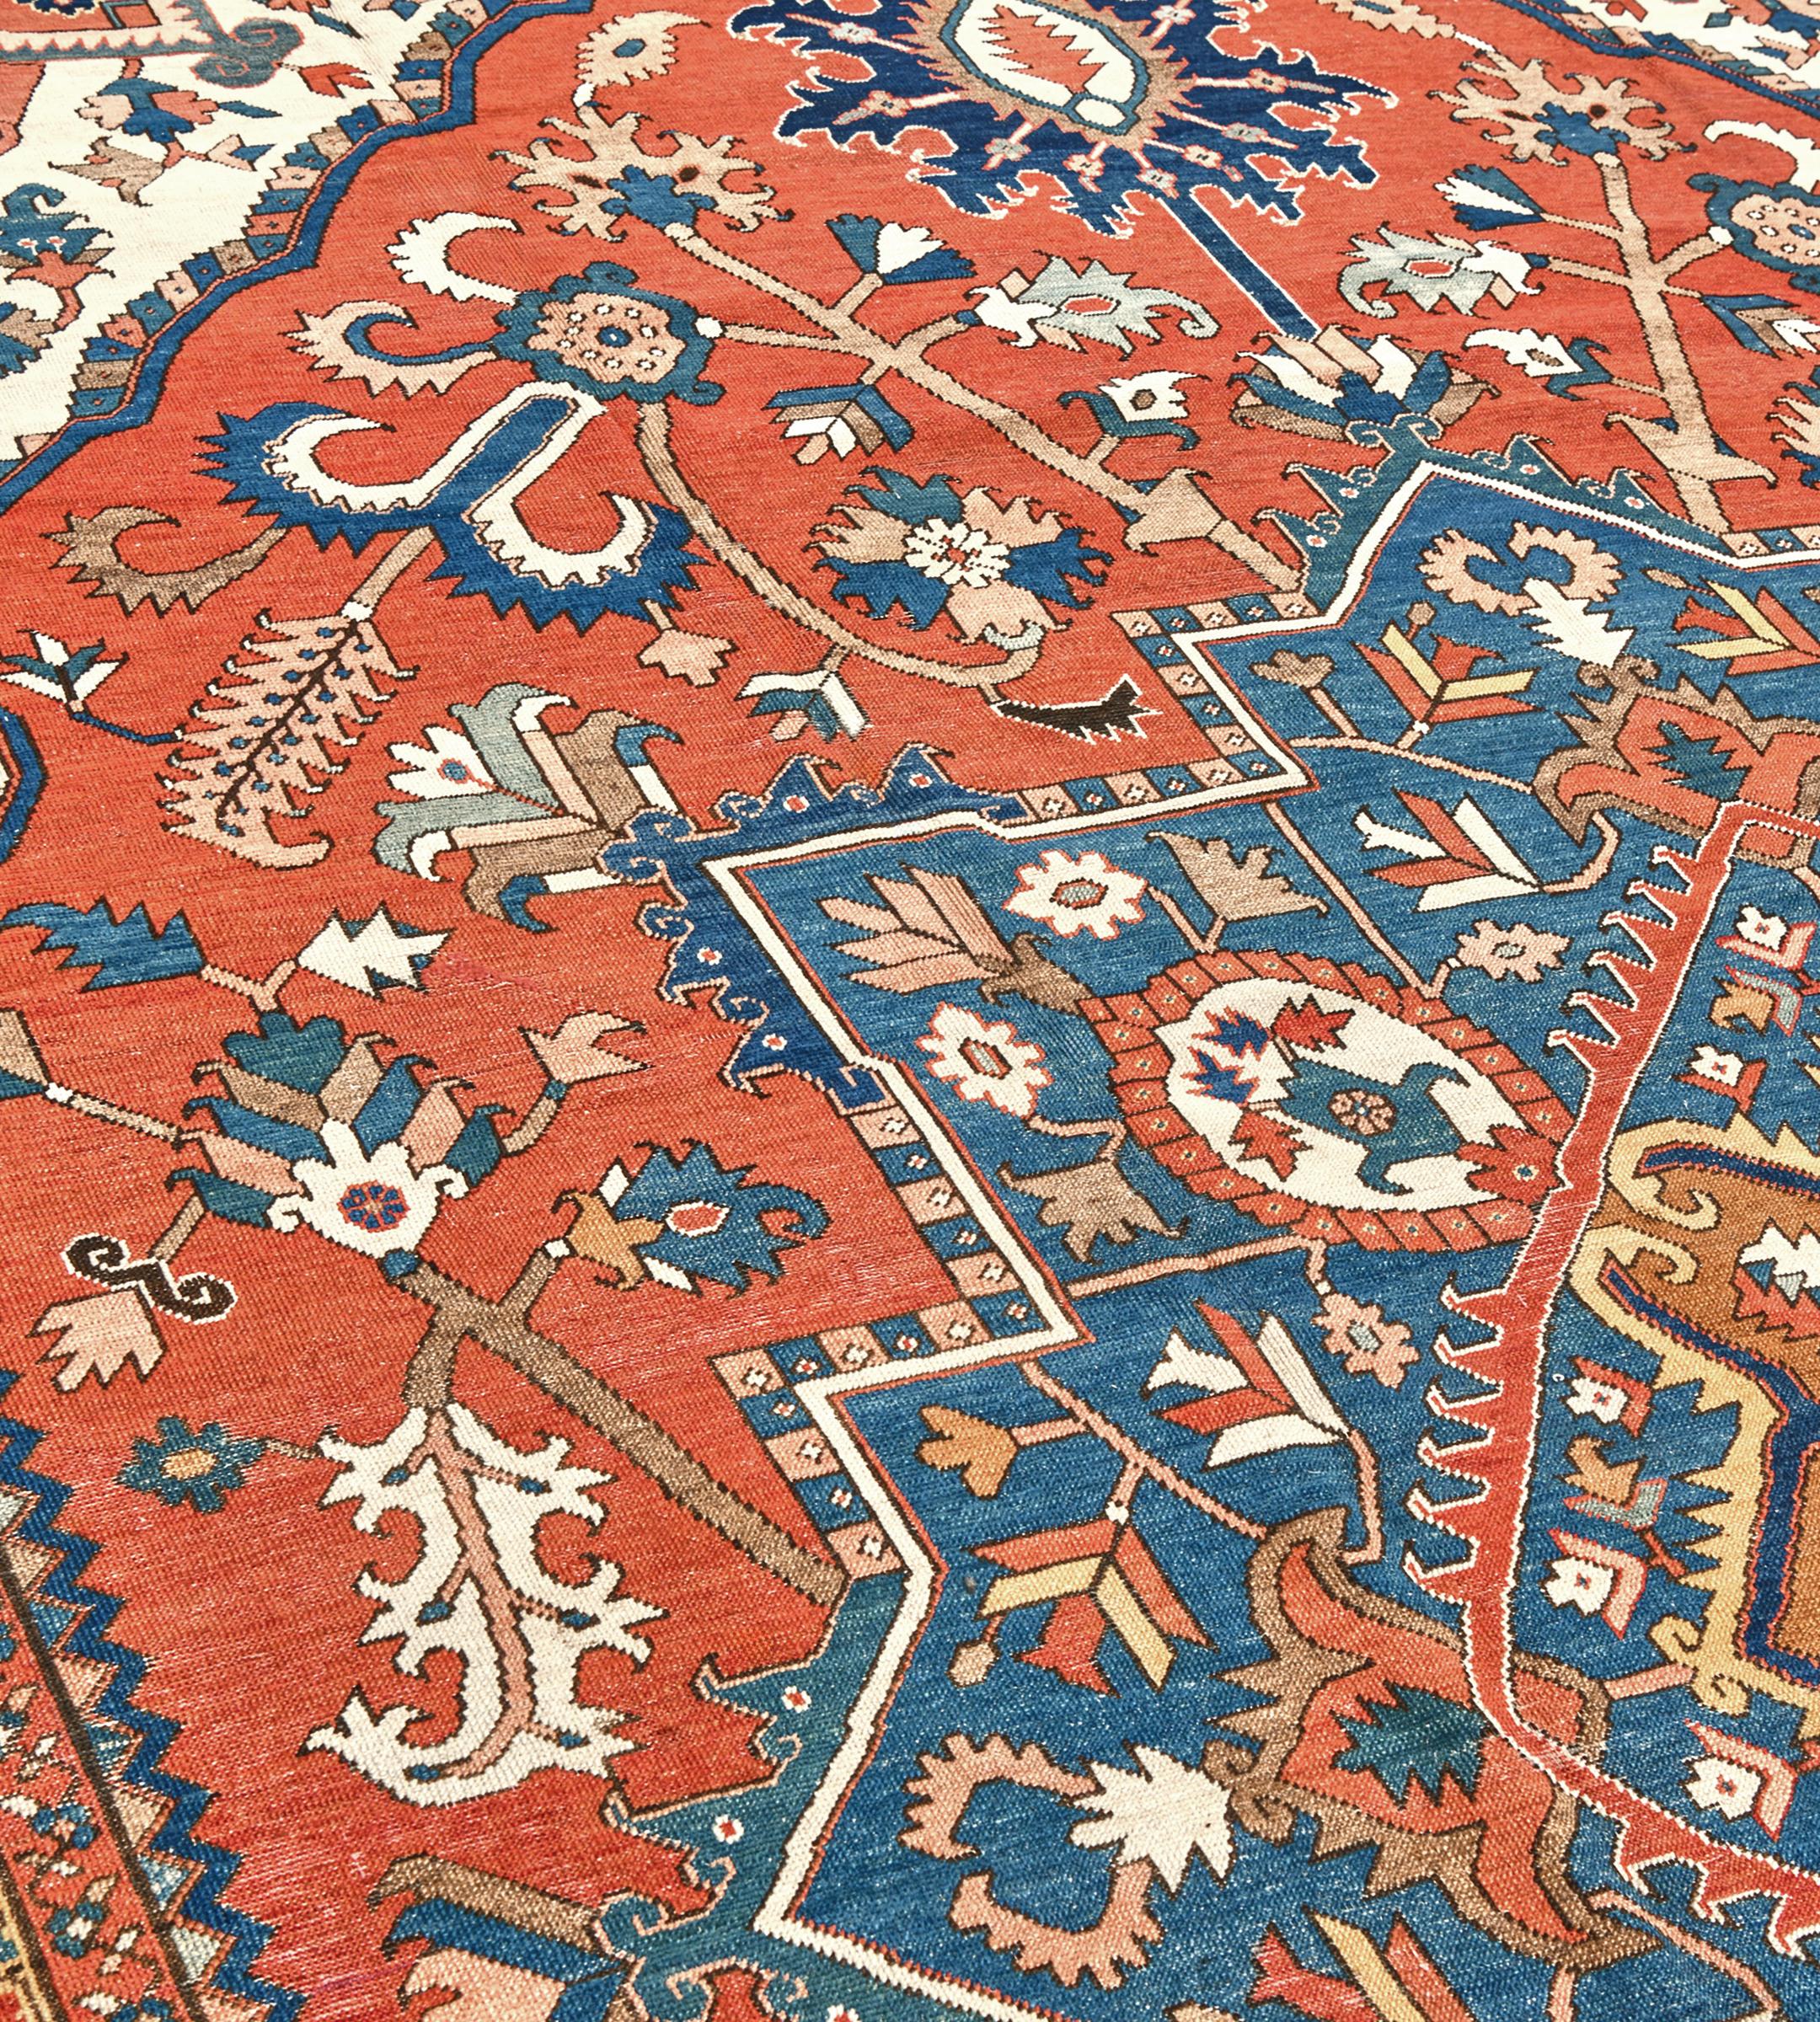 Hand-Knotted Traditional Wool Authentic Hand-Woven Persian Serapi Rug 10'1